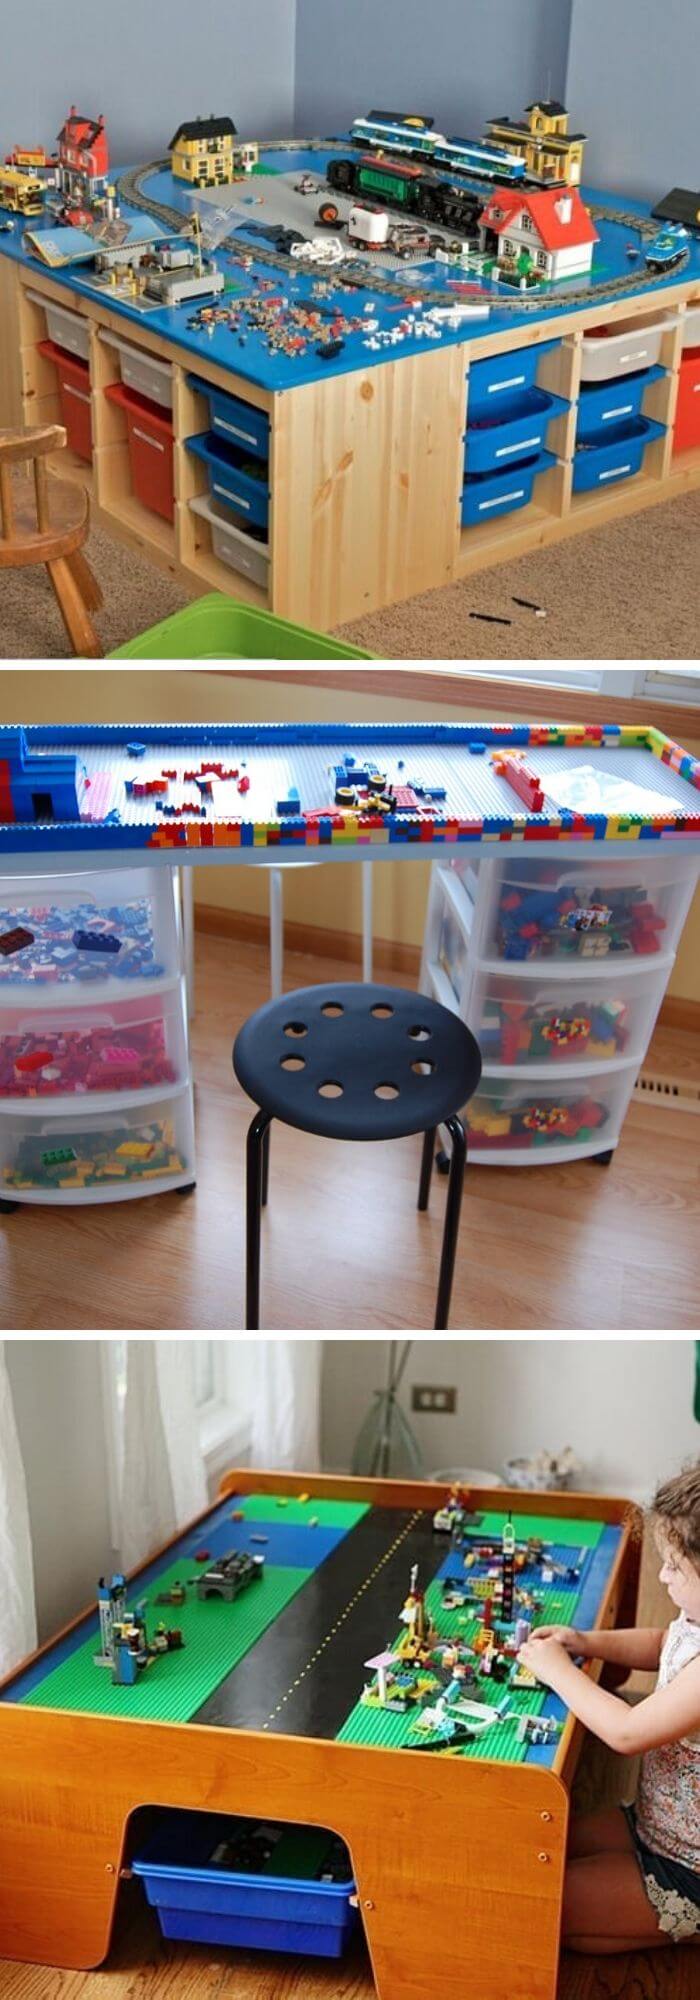 The latest technique is the Lego table